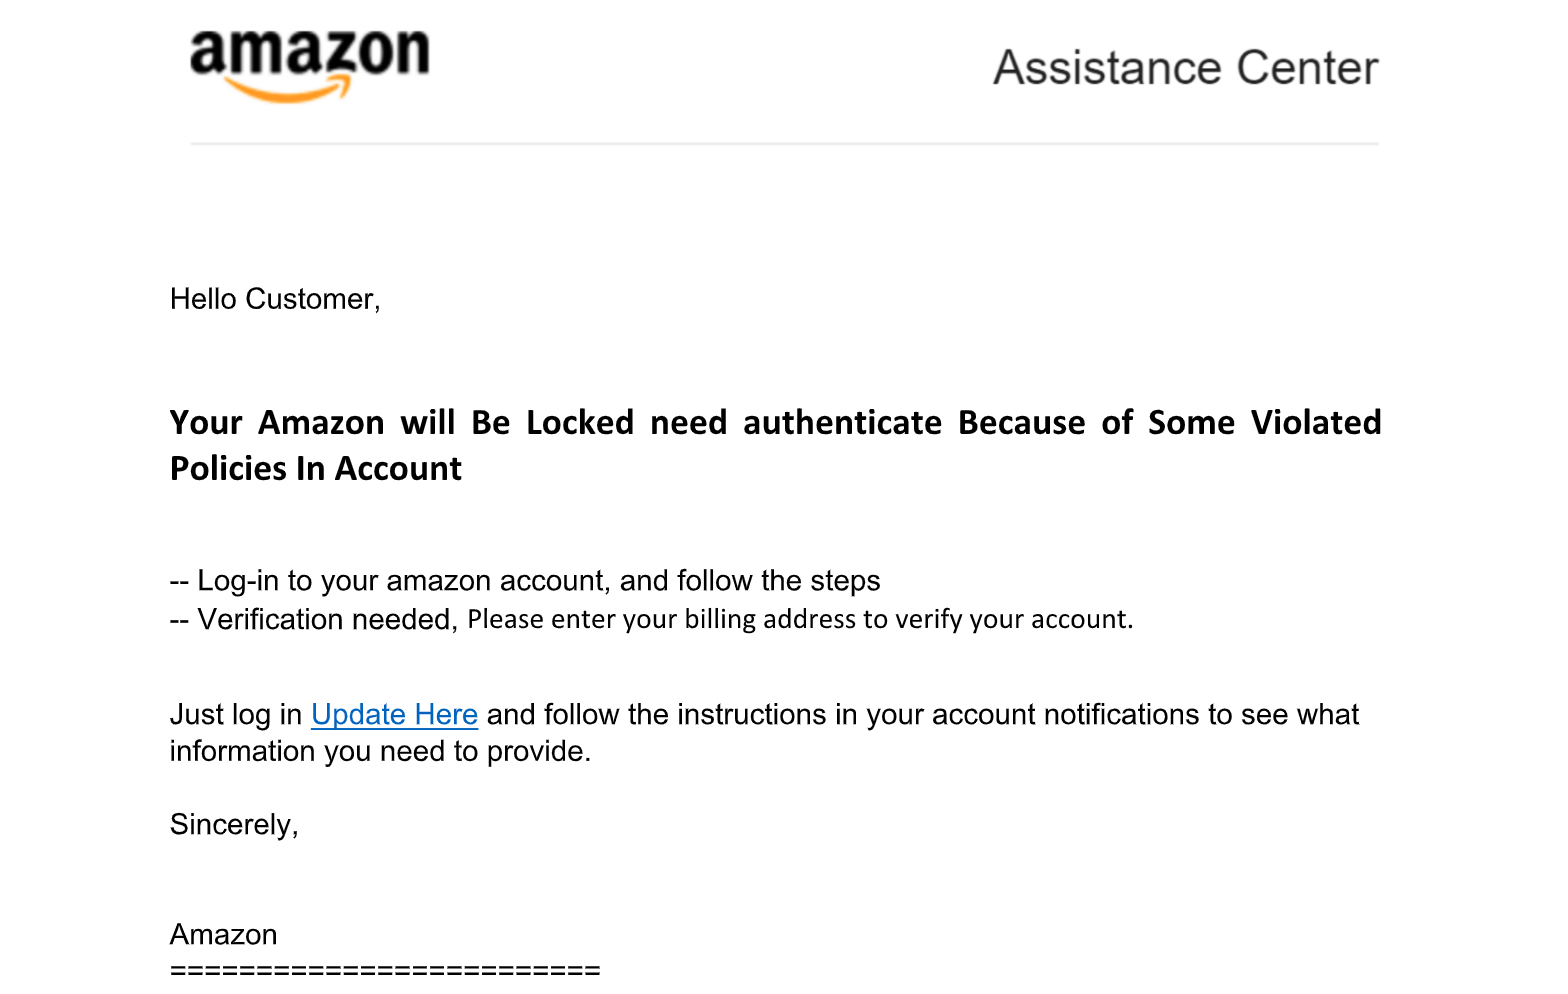 Online shoppers, don’t fall for this ‘Amazon locked’ scam